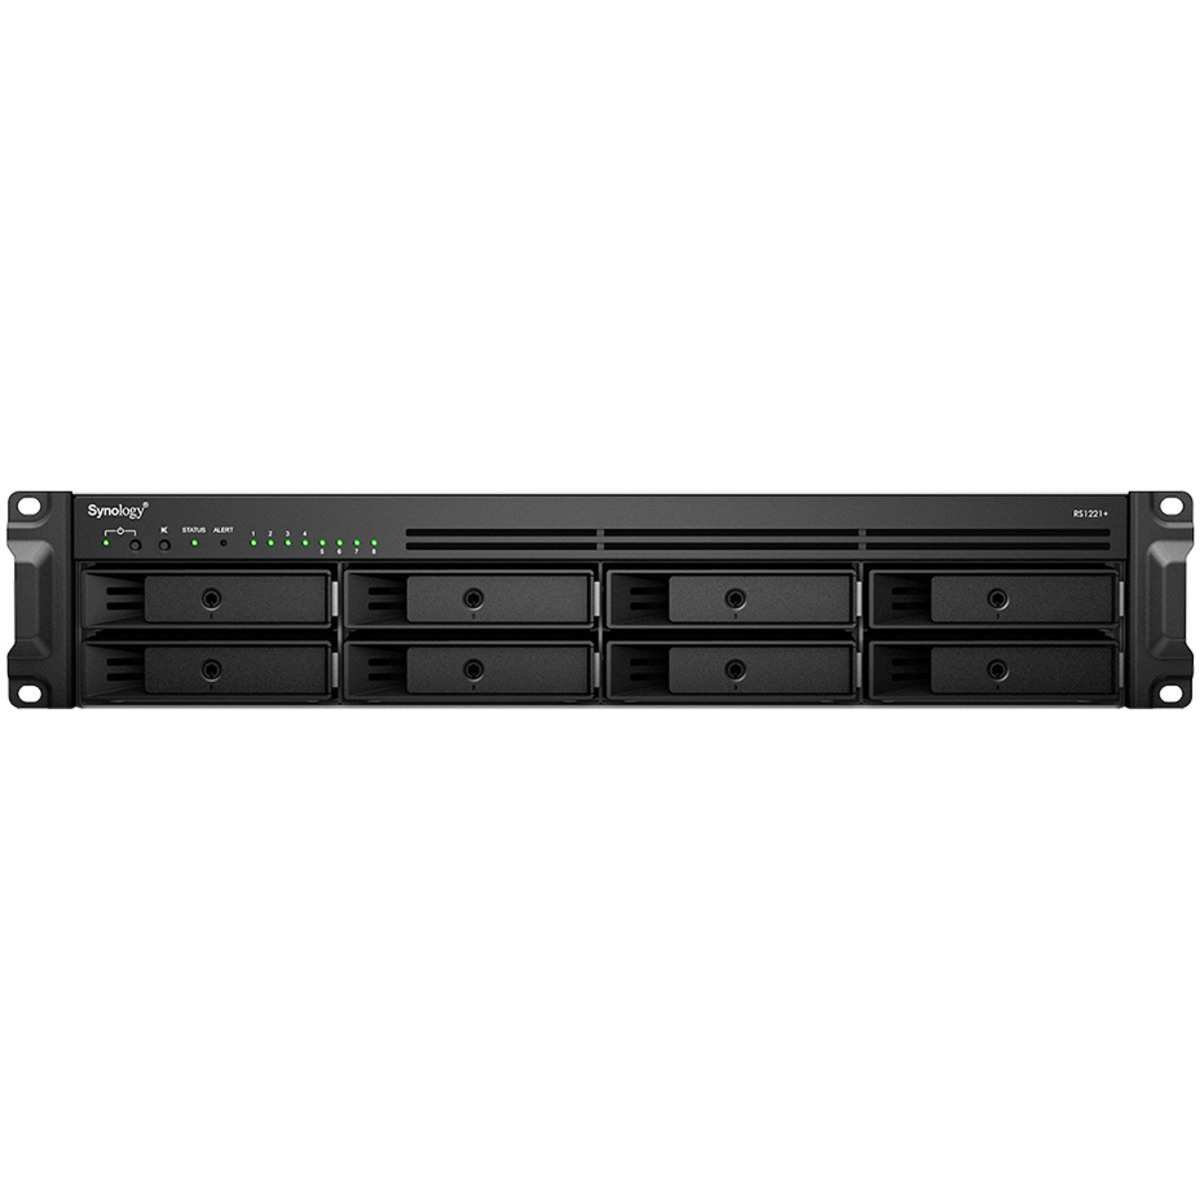 buy $3696 Synology RackStation RS1221+ 64tb RackMount NAS - Network Attached Storage Device 8x8000gb Seagate EXOS ST8000NM000A 3.5 7200rpm SATA 6Gb/s HDD ENTERPRISE Class Drives Installed - Burn-In Tested - nas headquarters buy network attached storage server device das new raid-5 free shipping usa christmas new year holiday sale RackStation RS1221+